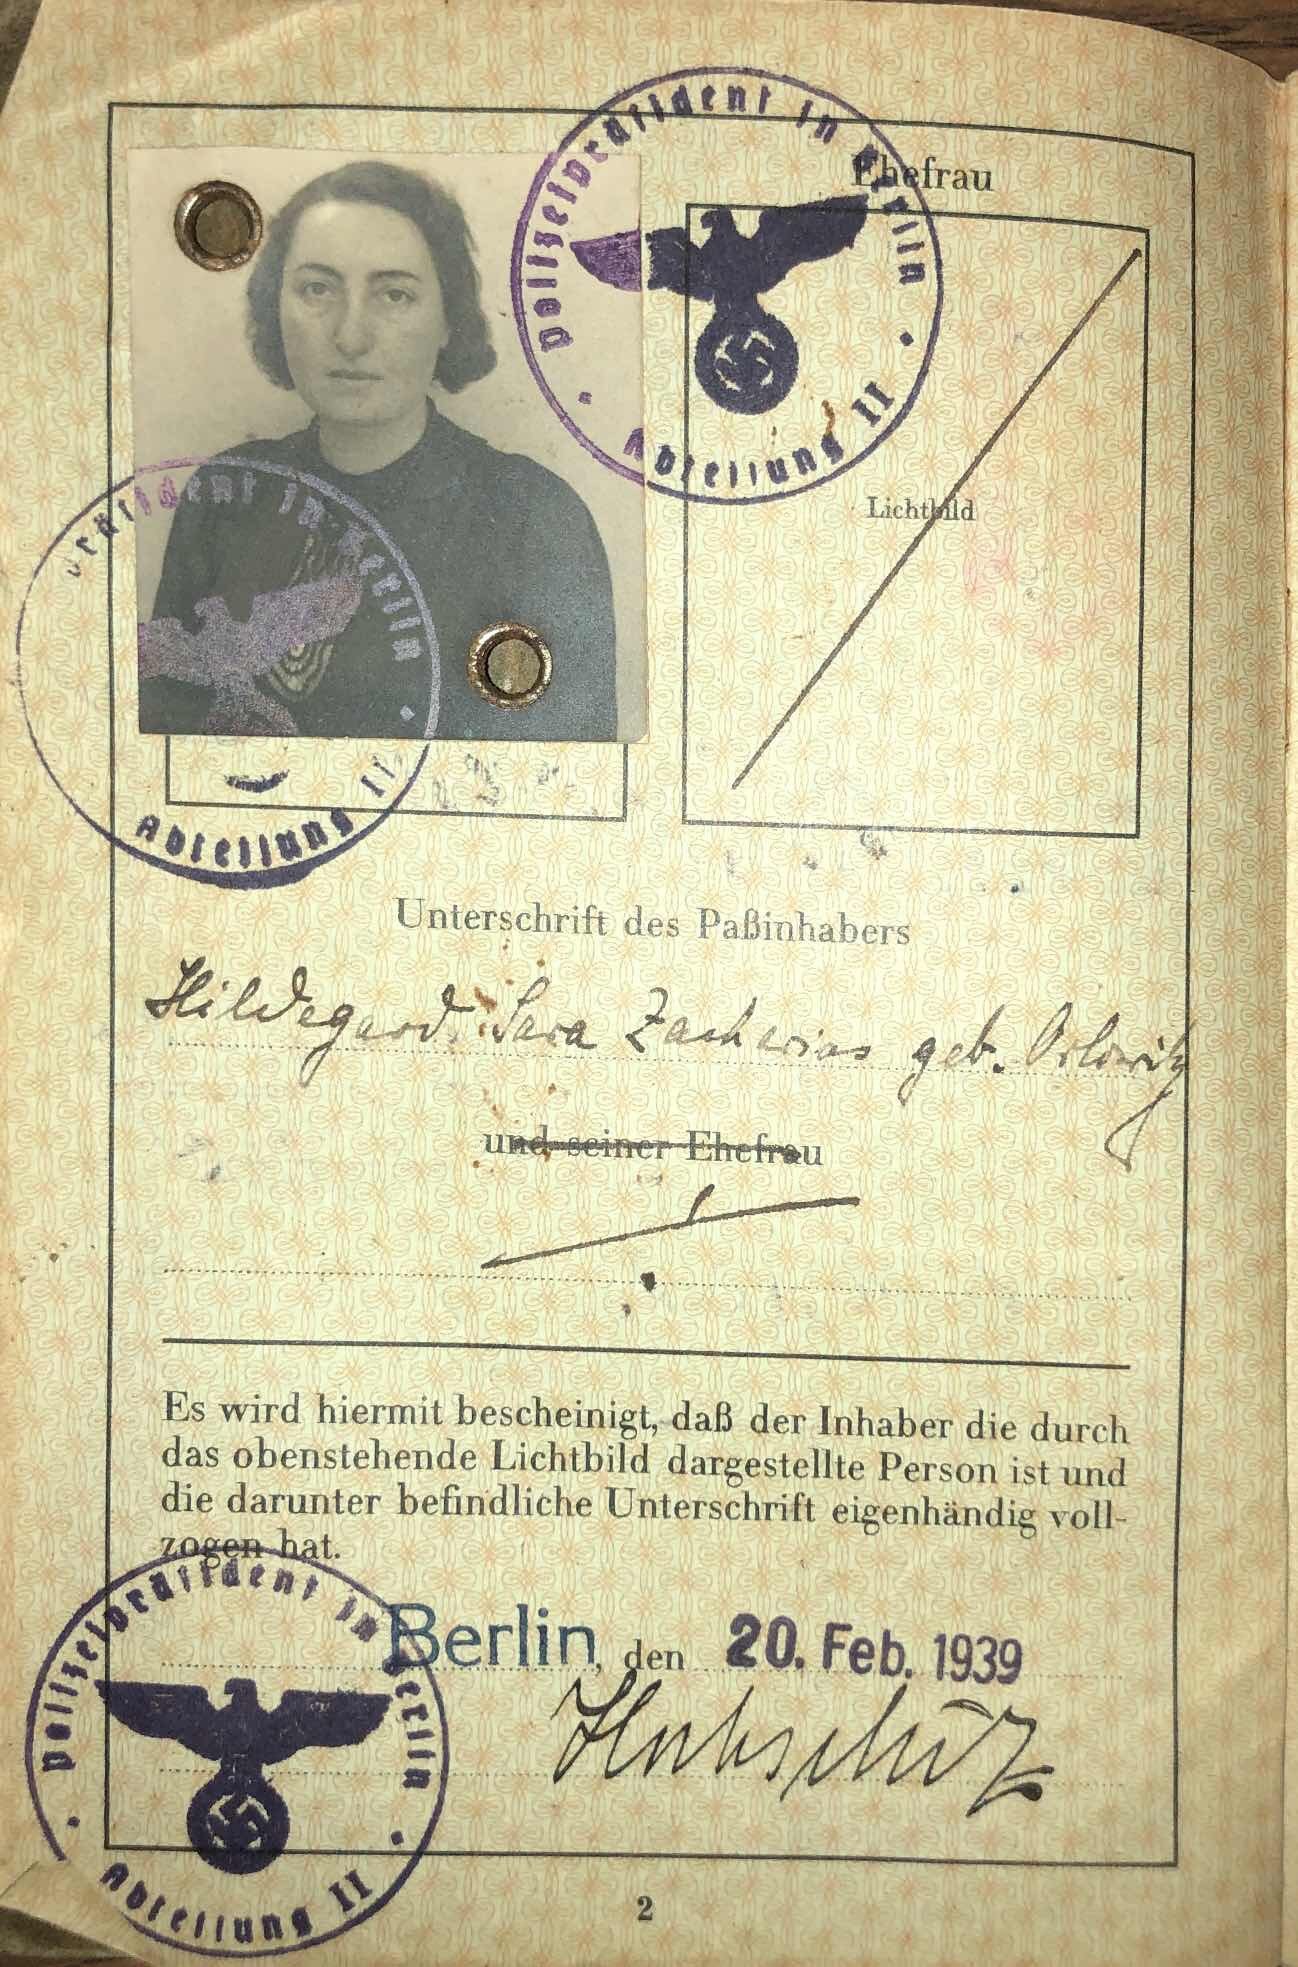 A German passport with the photograph of a woman and her handwritten name.